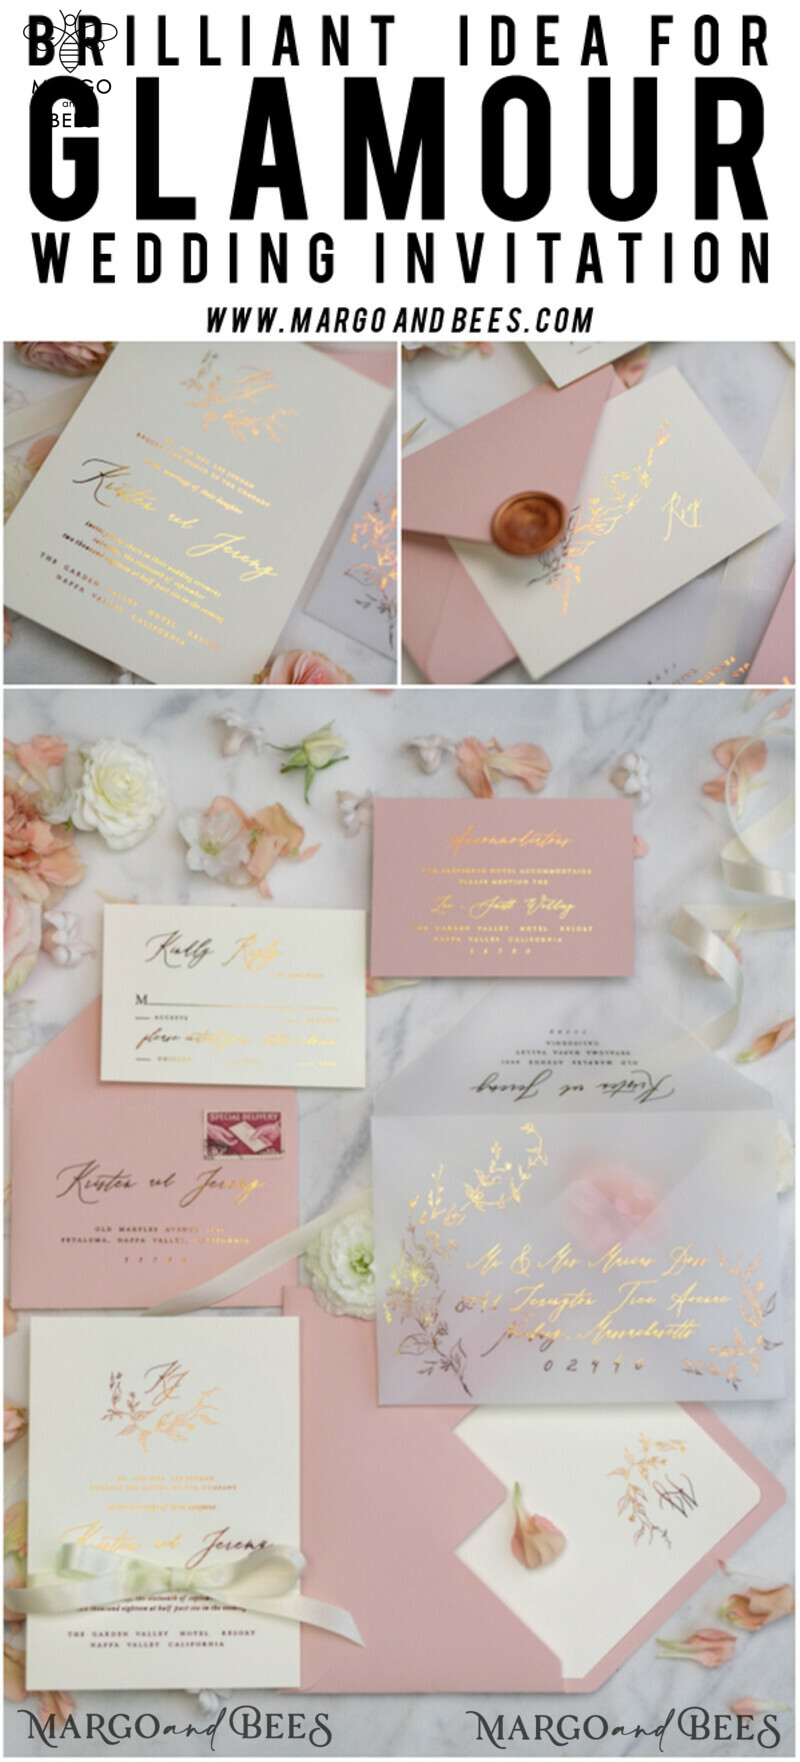 Bespoke Vellum Wedding Invitation Suite: Romantic Blush Pink and Glamour Gold Foil with Elegant Golden Touch-42